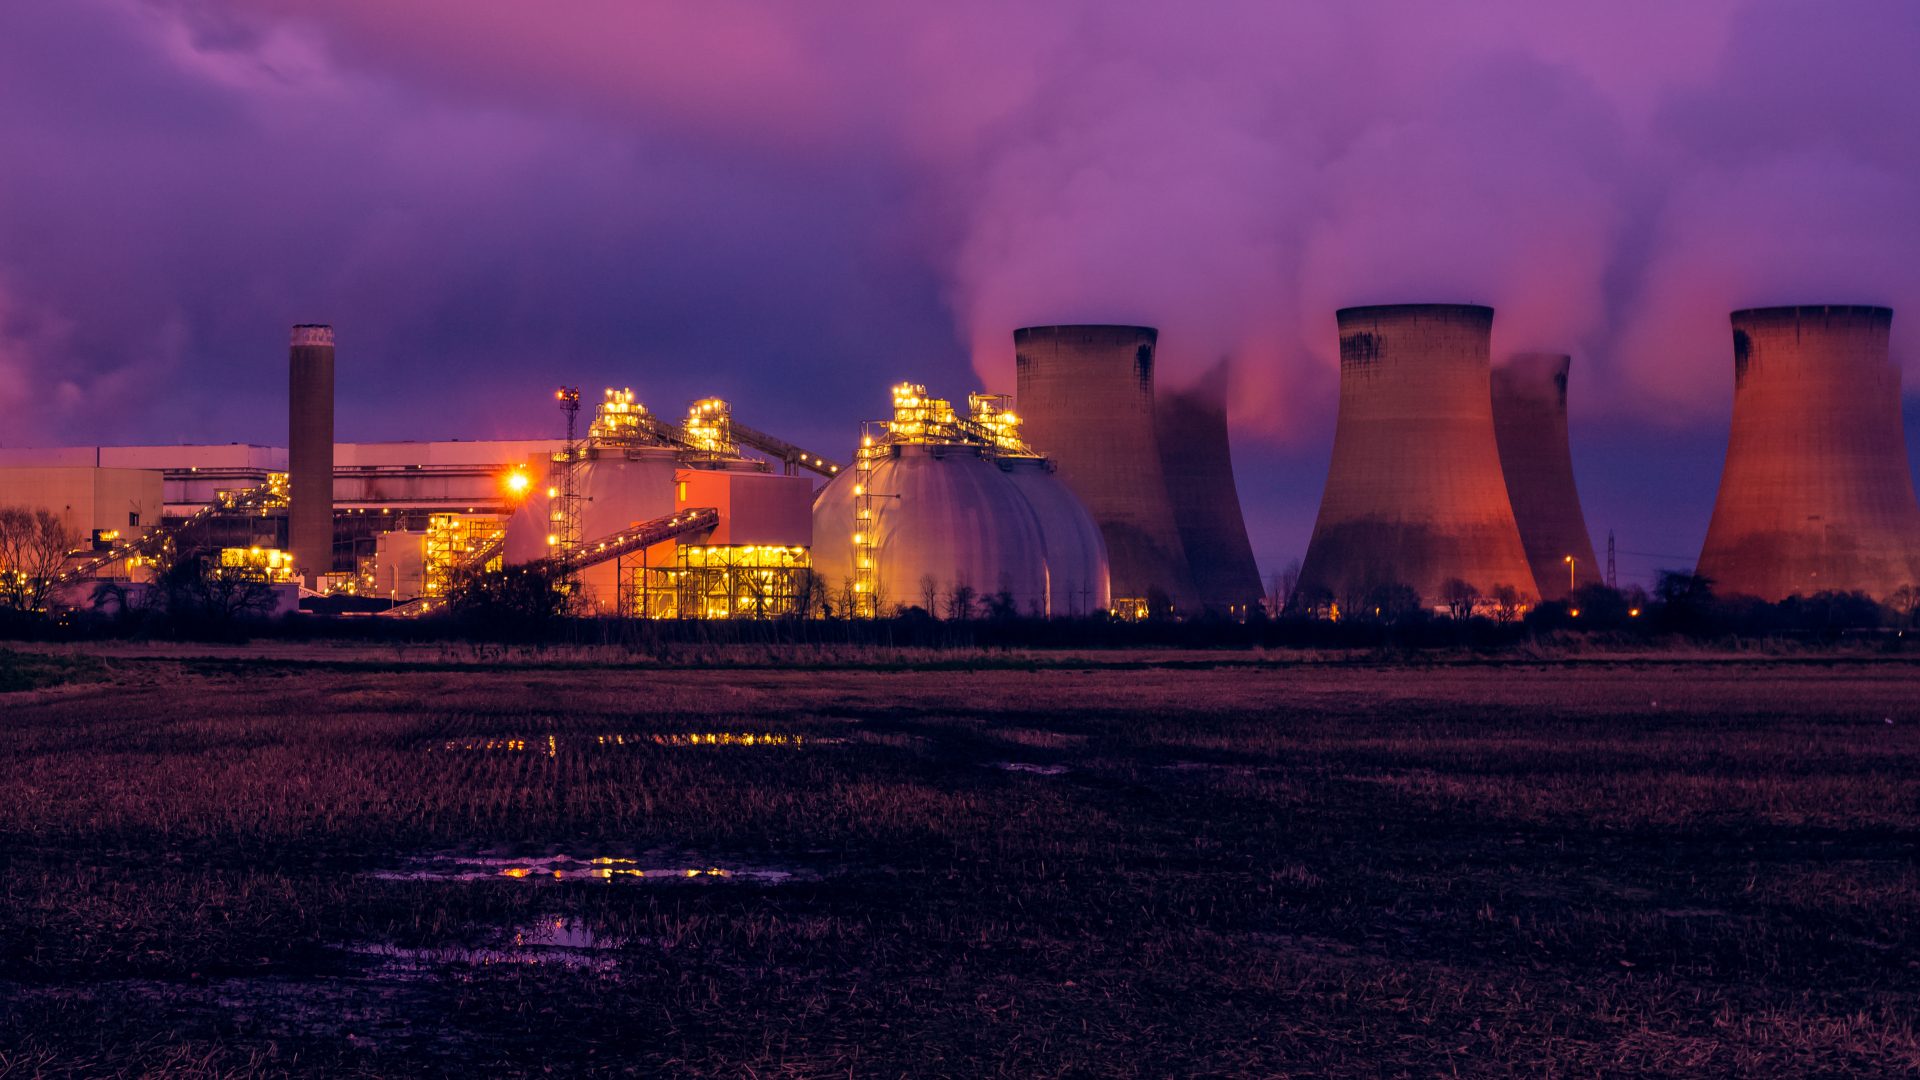 Drax Power Station with biomass storage domes lit up